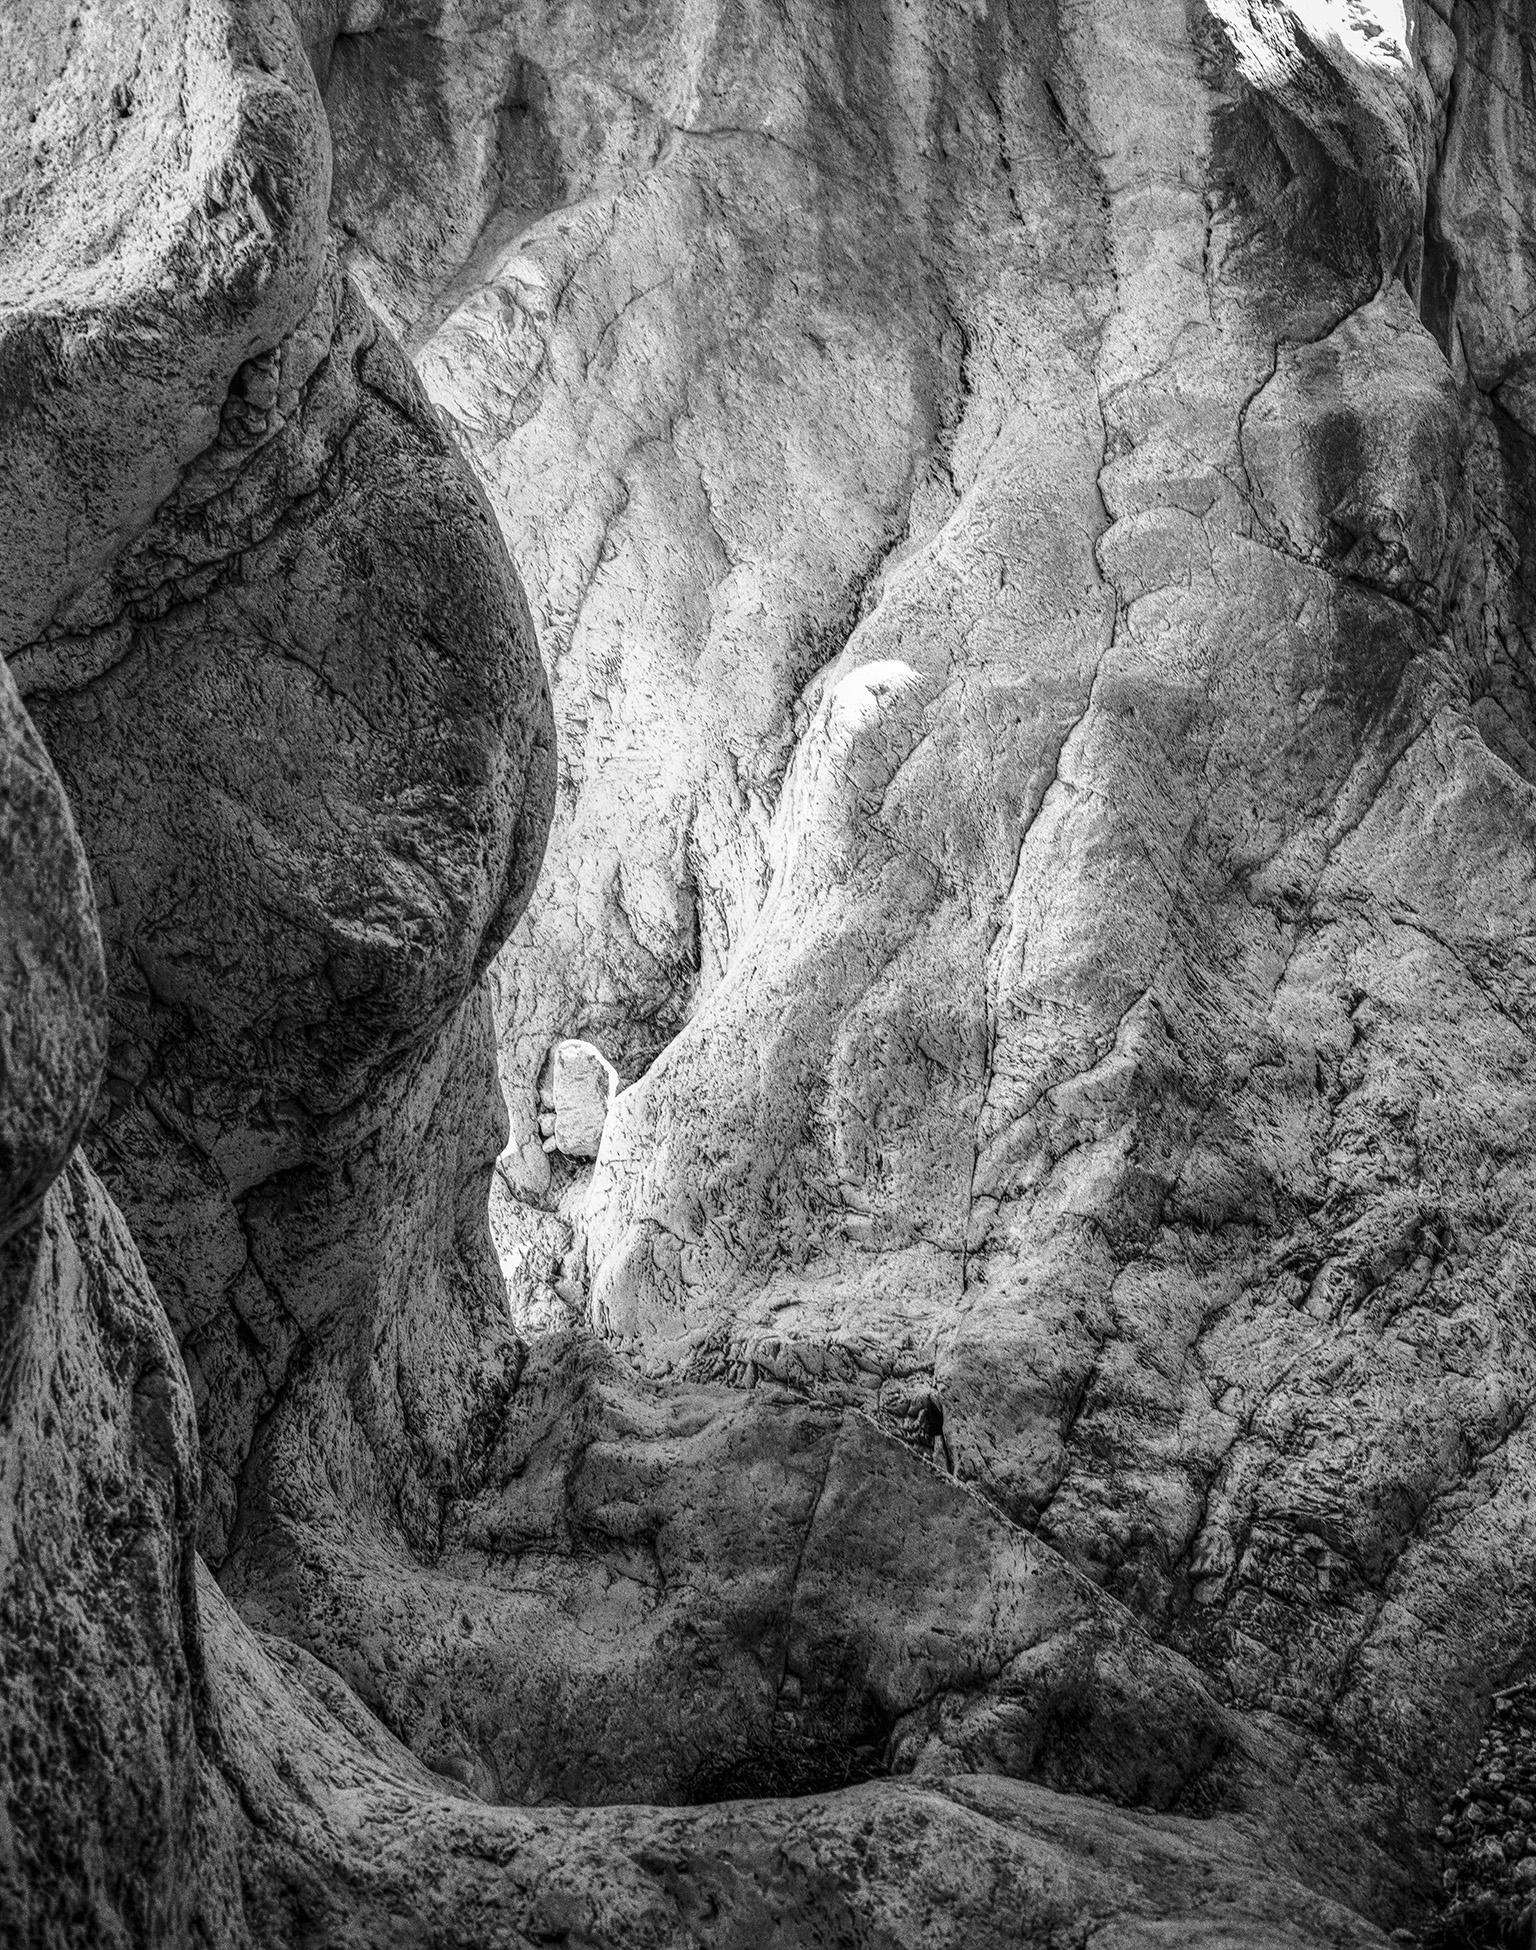 Homage to Heraclitus: Earth V - Black and White Landscape Photograph of a Cave